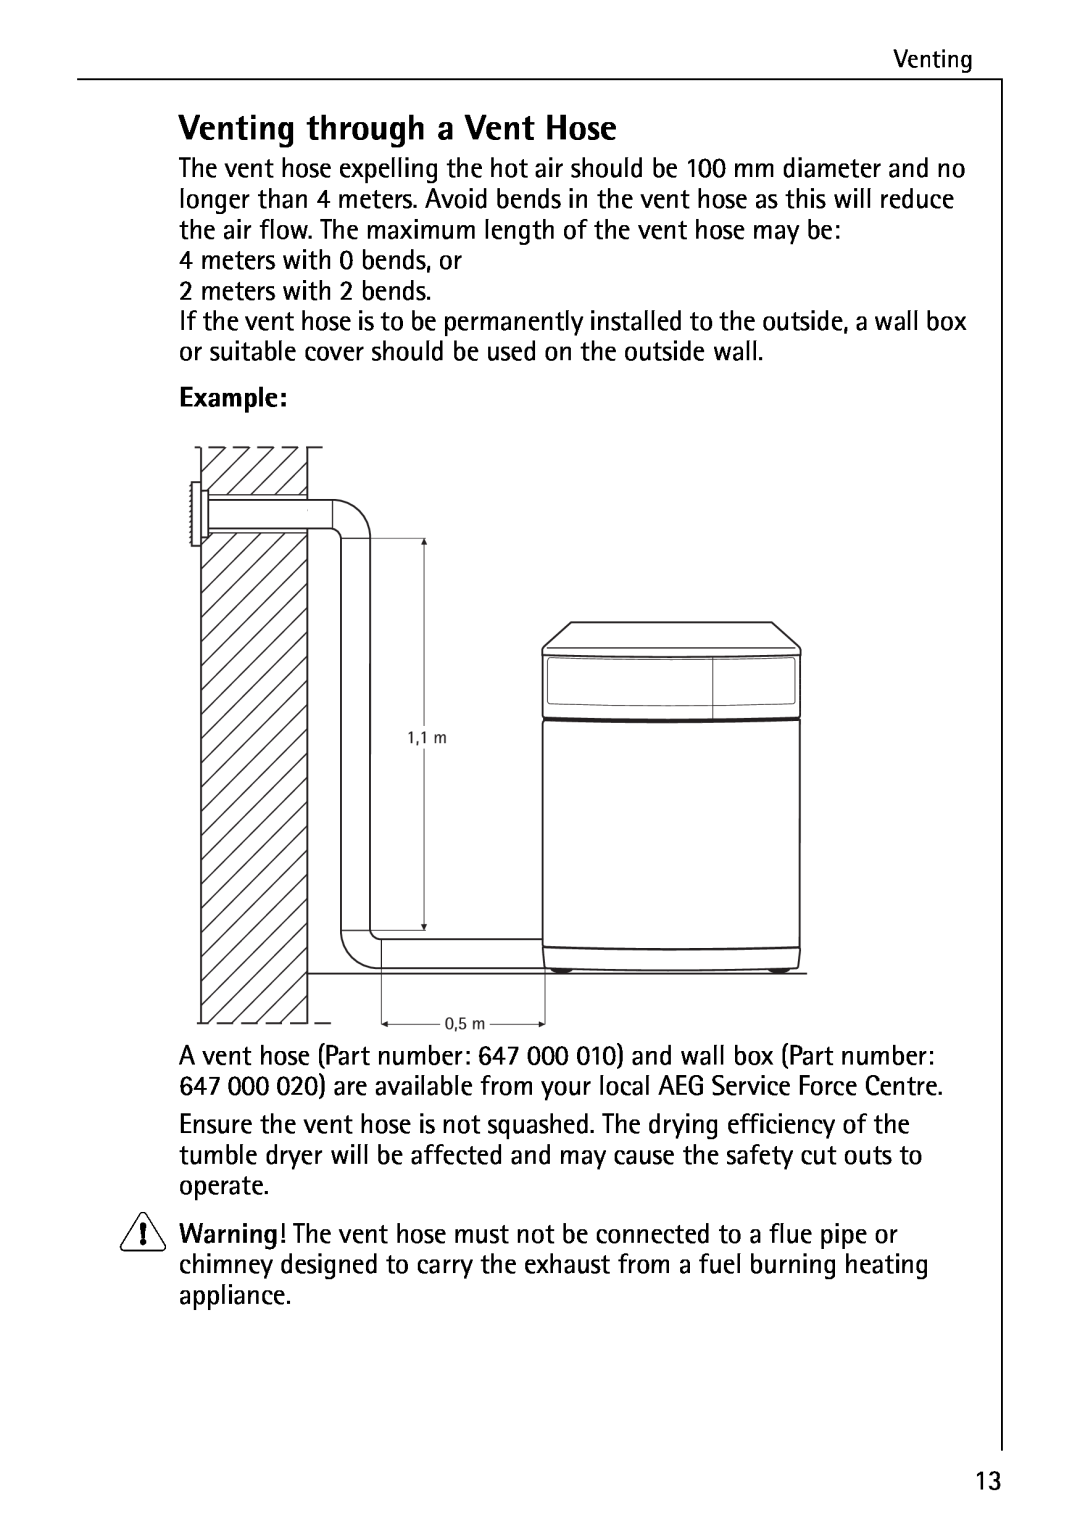 AEG 33600 installation instructions Venting through a Vent Hose, Example 